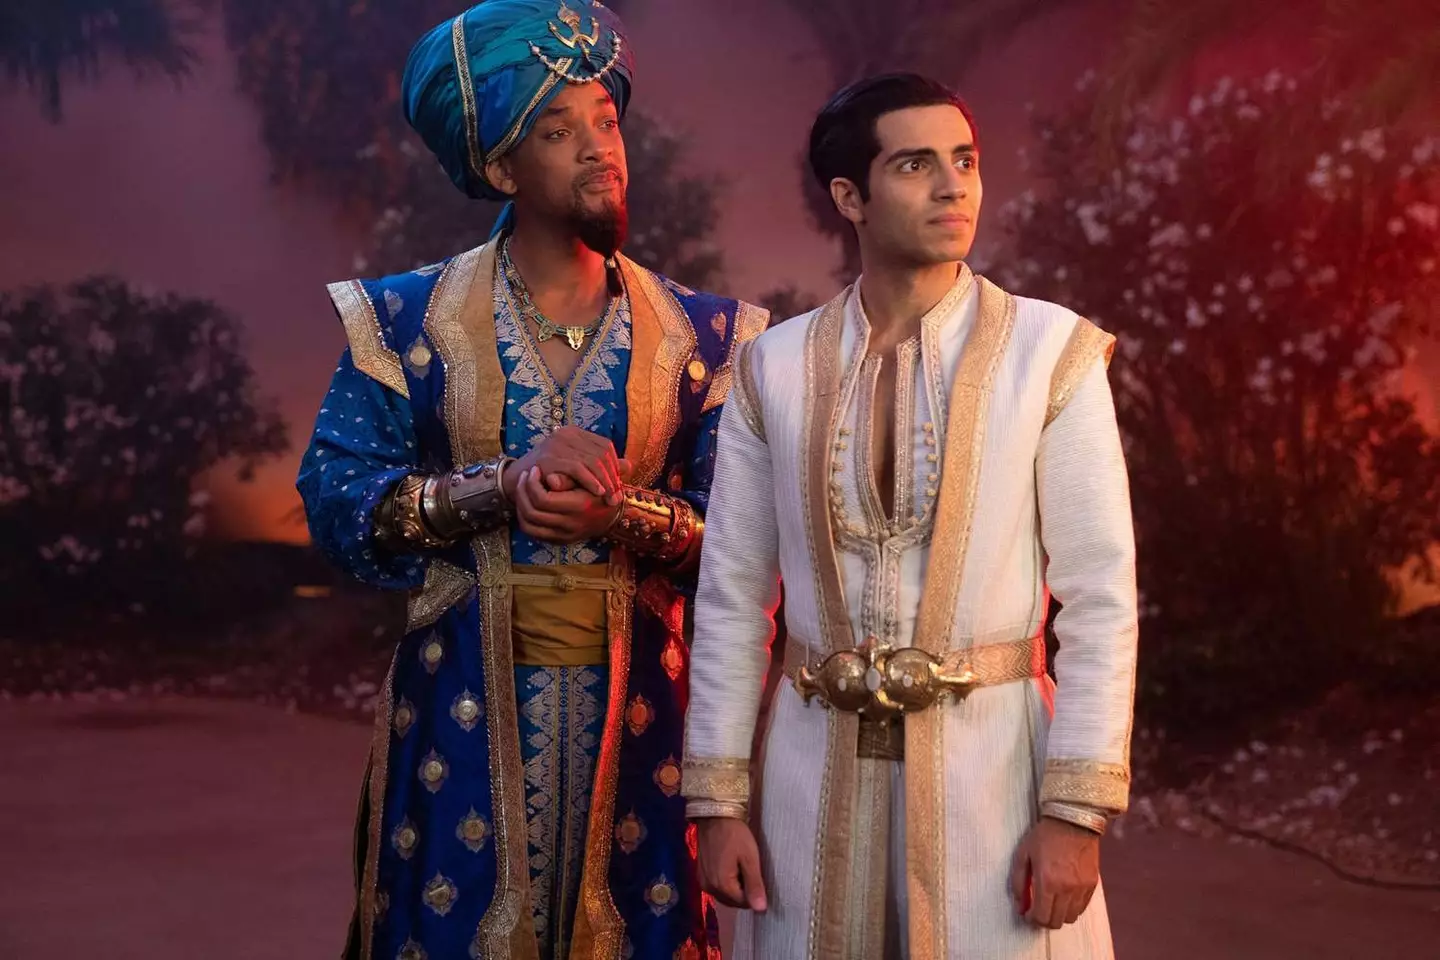 Mena Massoud, who starred in the 2019 film Aladdin, has deleted his entire Twitter account.